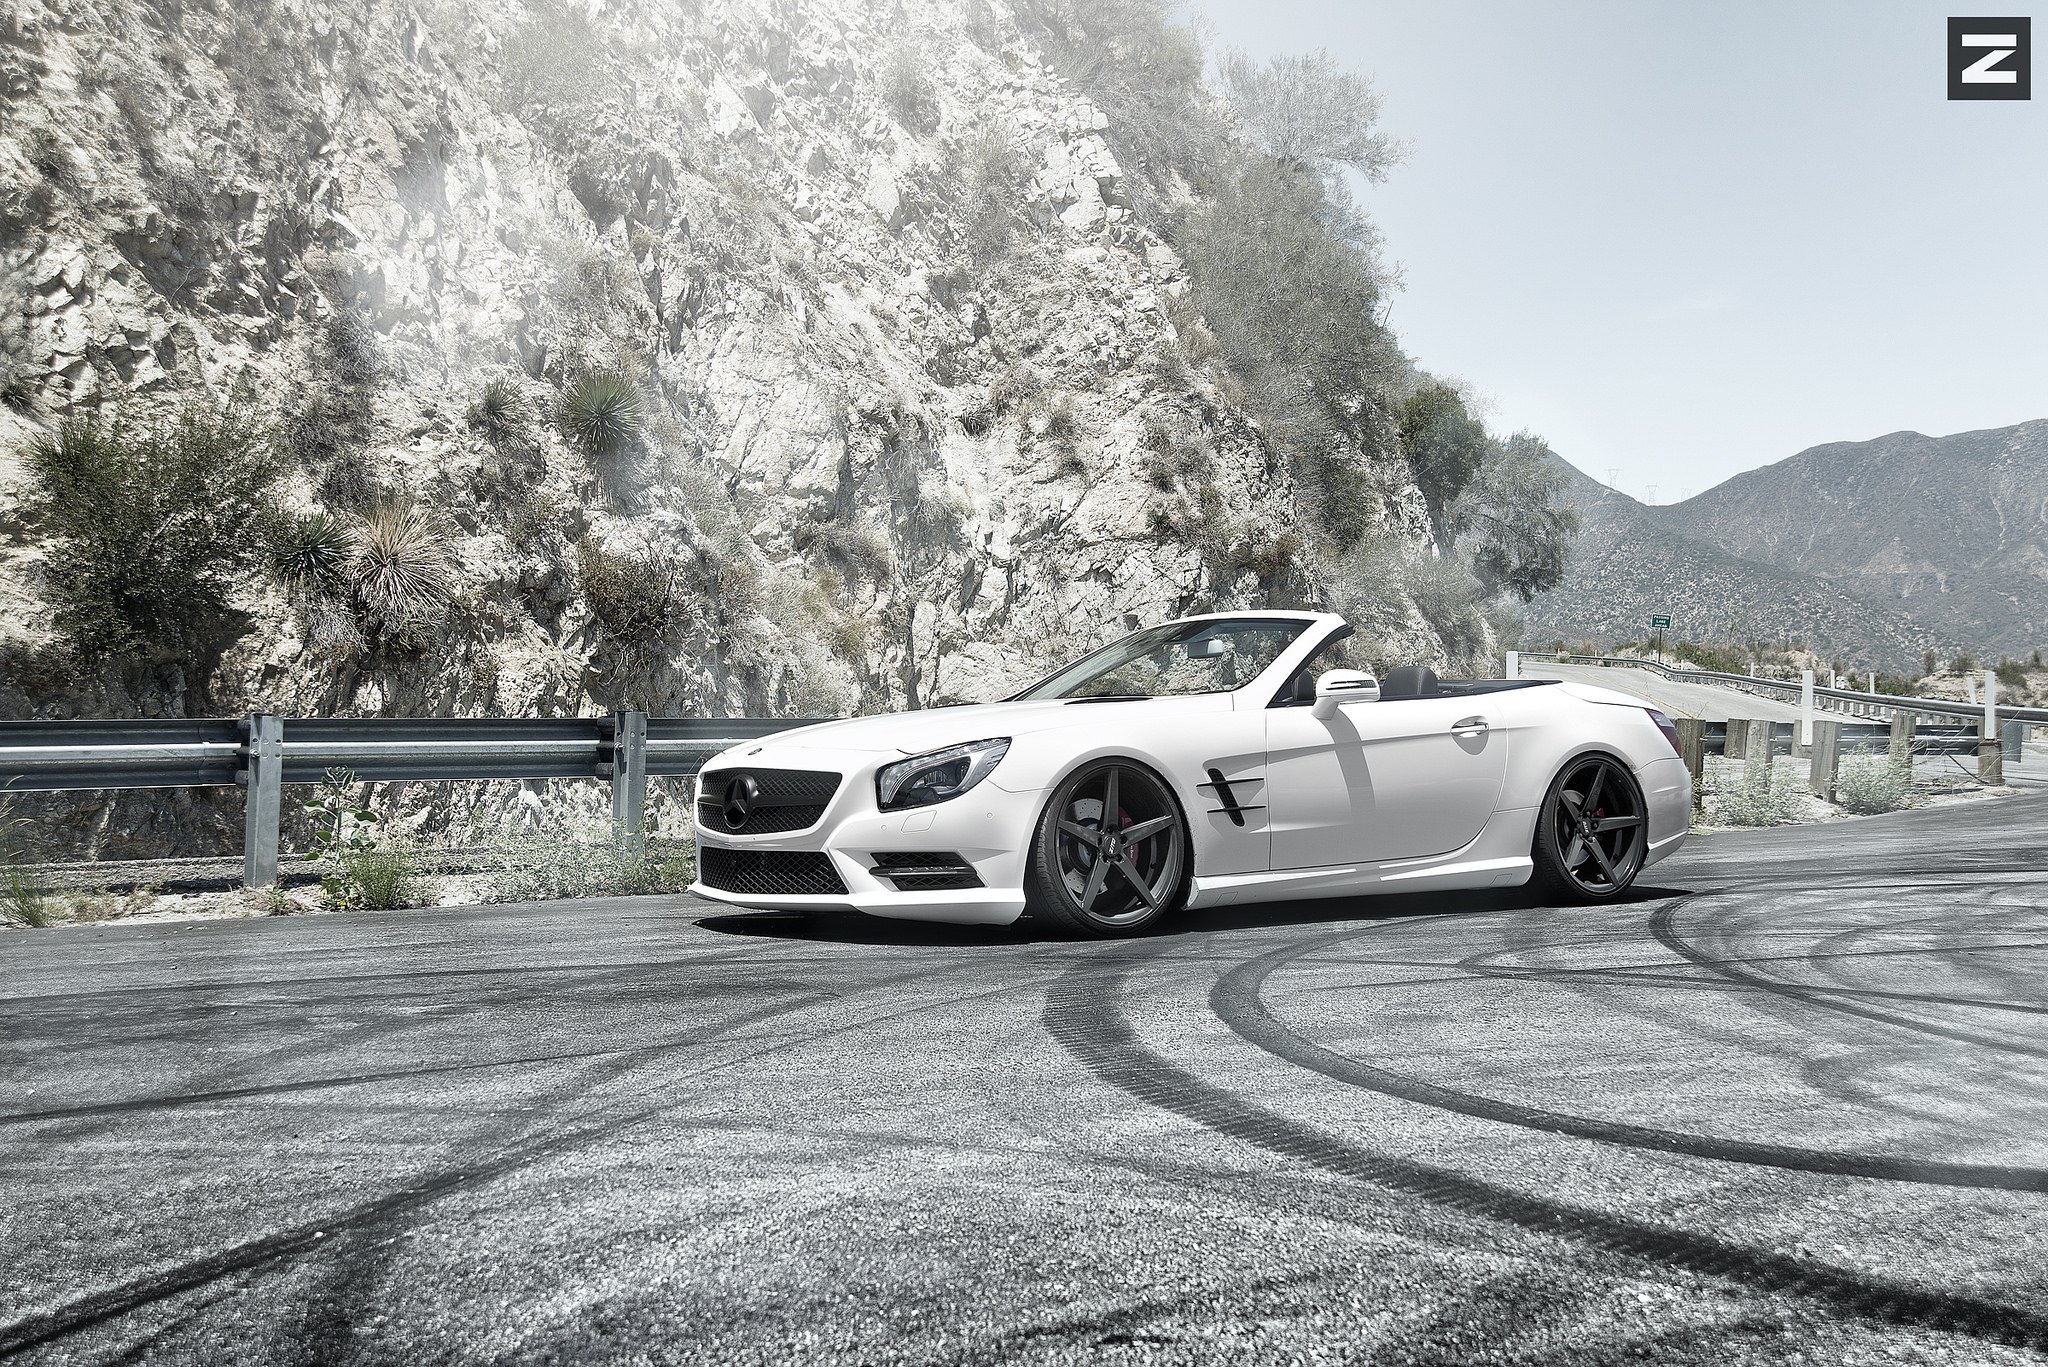 Aftermarket LED Headlights on White Convertible Mercedes SL - Photo by Zito Wheels